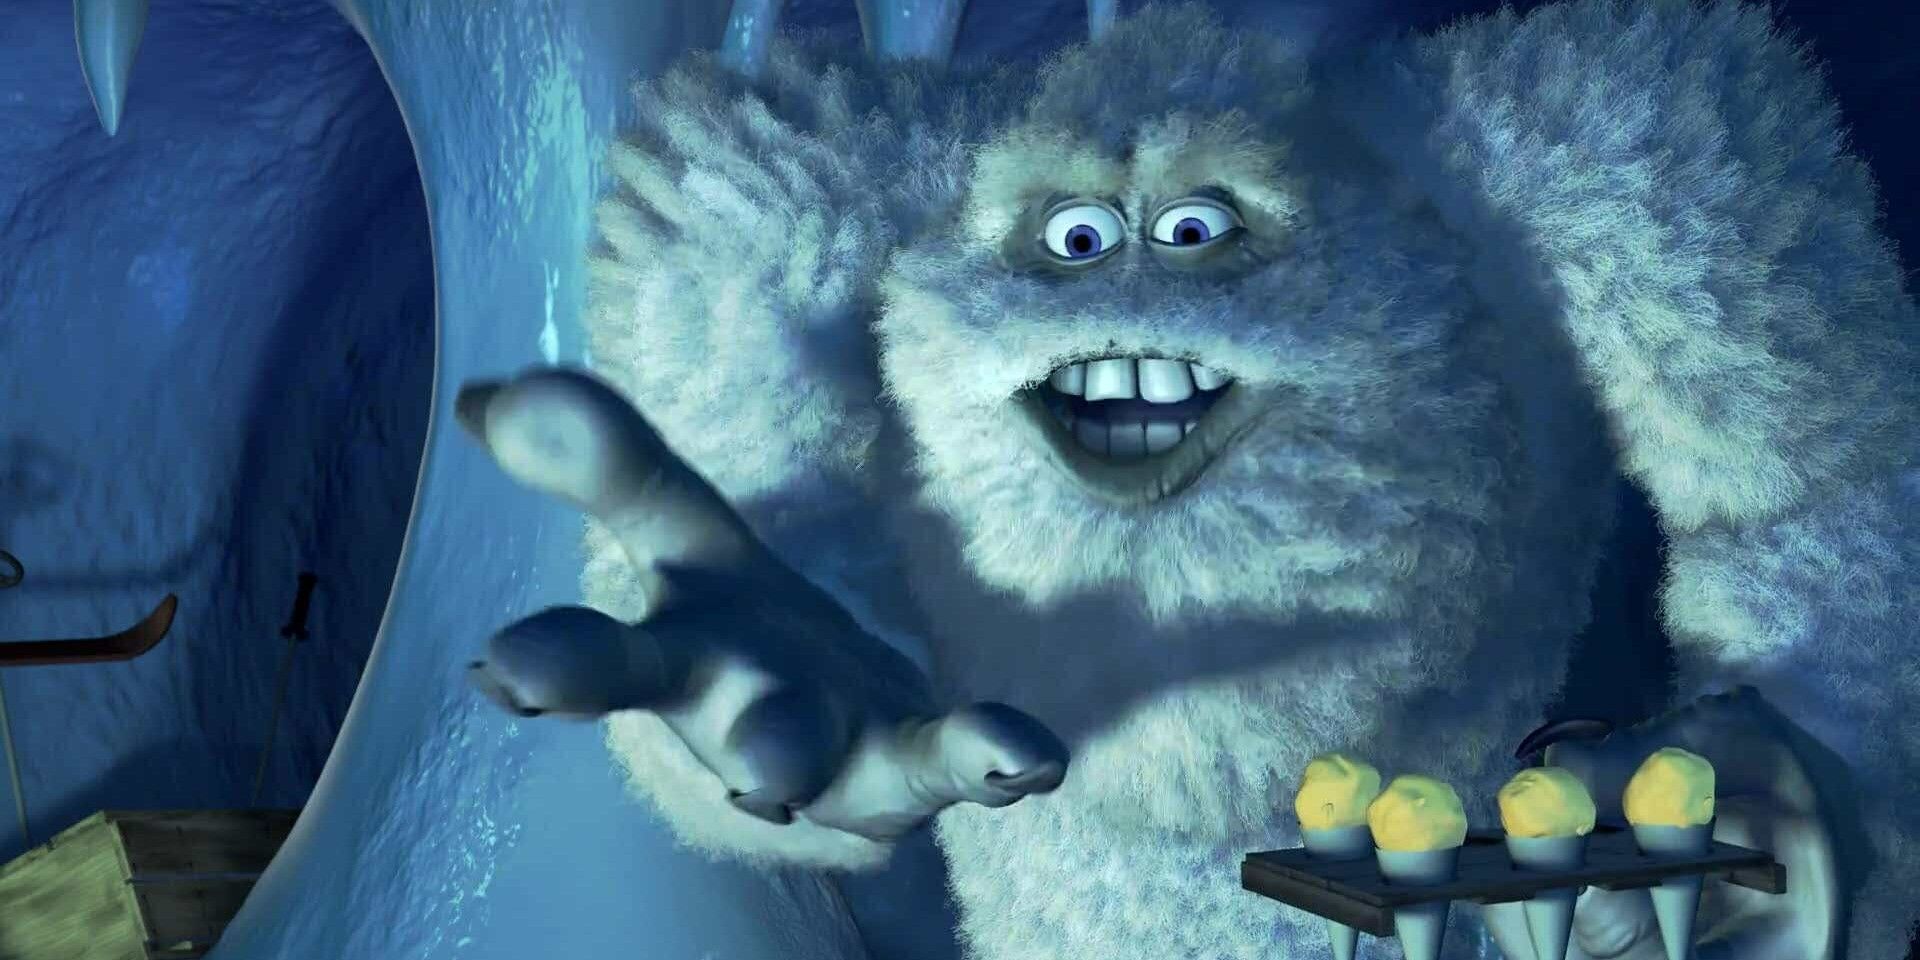 The Abominable Snowman presents his lemon snow cones in his ice cave